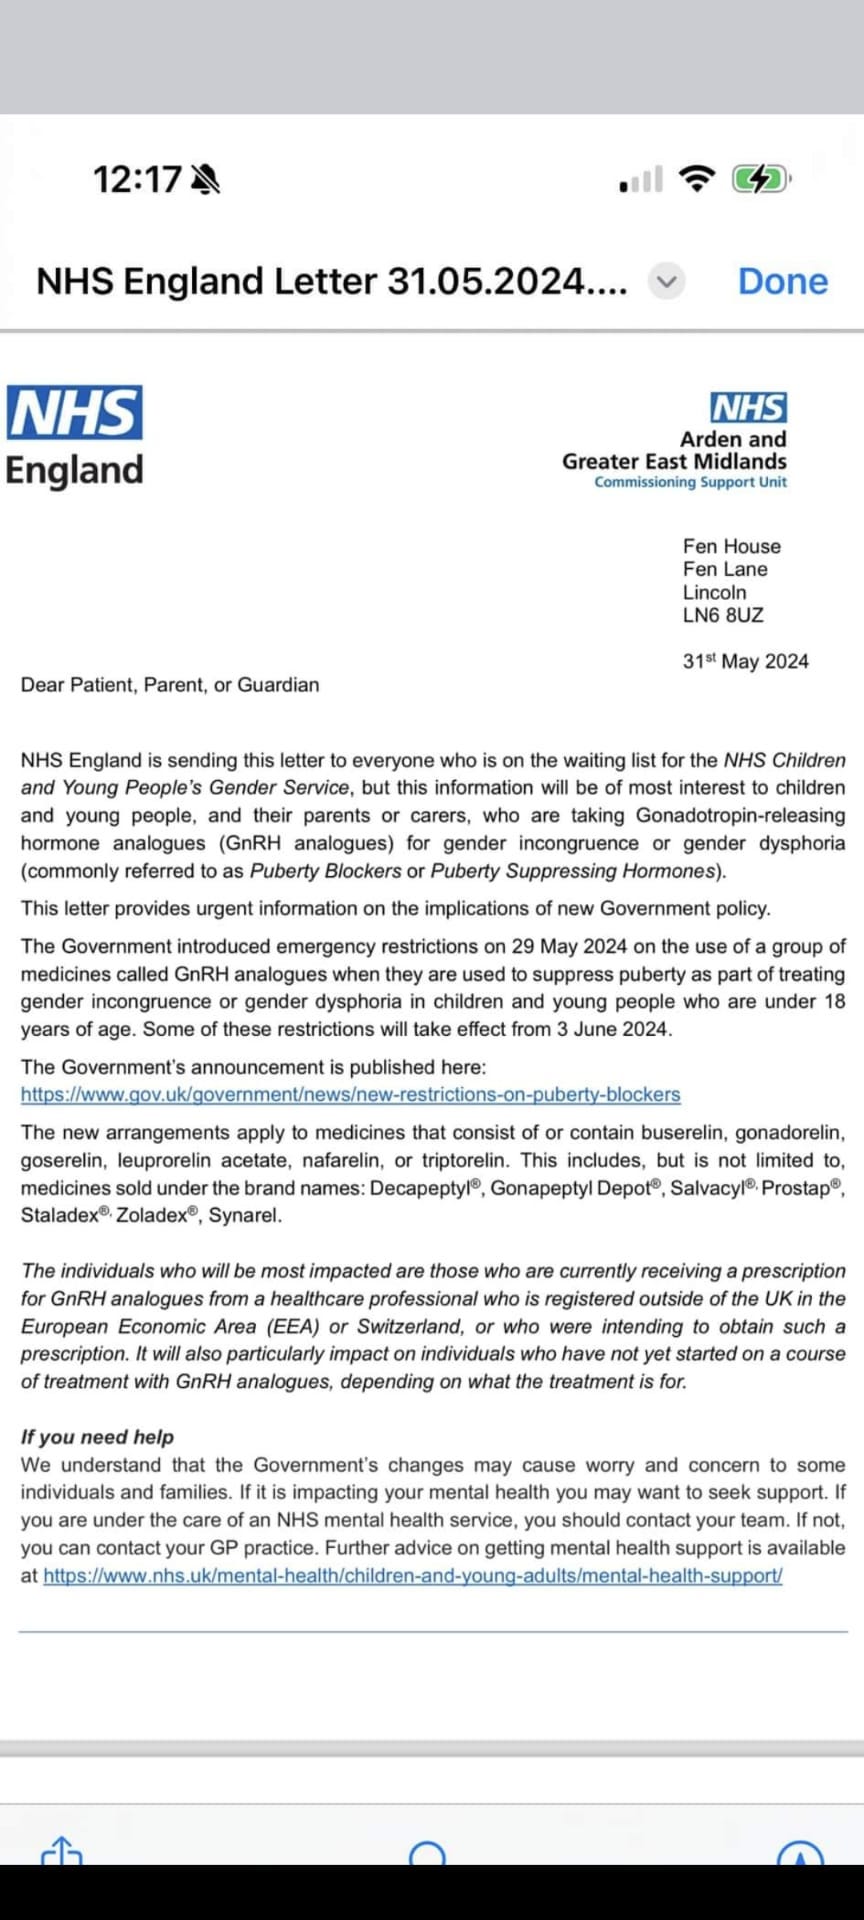 NHS England Letter 31.05.2024 Dear Patient, Parent, or Guardian NHS England is sending this letter to everyone who is on the waiting list for the NHS Children and Young People’s Gender Service, but this information will be of most interest to children and young people, and their parents or carers, who are taking Gonadotropin-releasing hormone analogues (GnRH analogues) for gender incongruence or gender dysphoria (commonly referred to as Puberty Blockers or Puberty Suppressing Hormones). This letter provides urgent information on the implications of new Government policy. The Government introduced emergency restrictions on 29 May 2024 on the use of a group of medicines called GnRH analogues when they are used to suppress puberty as part of treating gender incongruence or gender dysphoria in children and young people who are under 18 years of age. Some of these restrictions will take effect from 3 June 2024. The Government’s announcement is published here: New Restrictions on Puberty Blockers. The new arrangements apply to medicines that consist of or contain buserelin, gonadorelin, goserelin, leuprorelin acetate, nafarelin, or triptorelin. This includes, but is not limited to, medicines sold under the brand names: Decapeptyl, Gonapeptyl Depot, Salvacyl, Prostap, Staladex, Zoladex, Synarel. The individuals who will be most impacted are those who are currently receiving a prescription for GnRH analogues from a healthcare professional who is registered outside of the UK in the European Economic Area (EEA) or Switzerland, or who were intending to obtain such a prescription. It will also particularly impact on individuals who have not yet started on a course of treatment with GnRH analogues, depending on what the treatment is for. If you need help We understand that the Government’s changes may cause worry and concern to some individuals and families. If it is impacting your mental health you may want to seek support. If you are under the care of an NHS mental health service, you should contact your team. If not, you can contact your GP practice. Further advice on getting mental health support is available at NHS Mental Health Support.